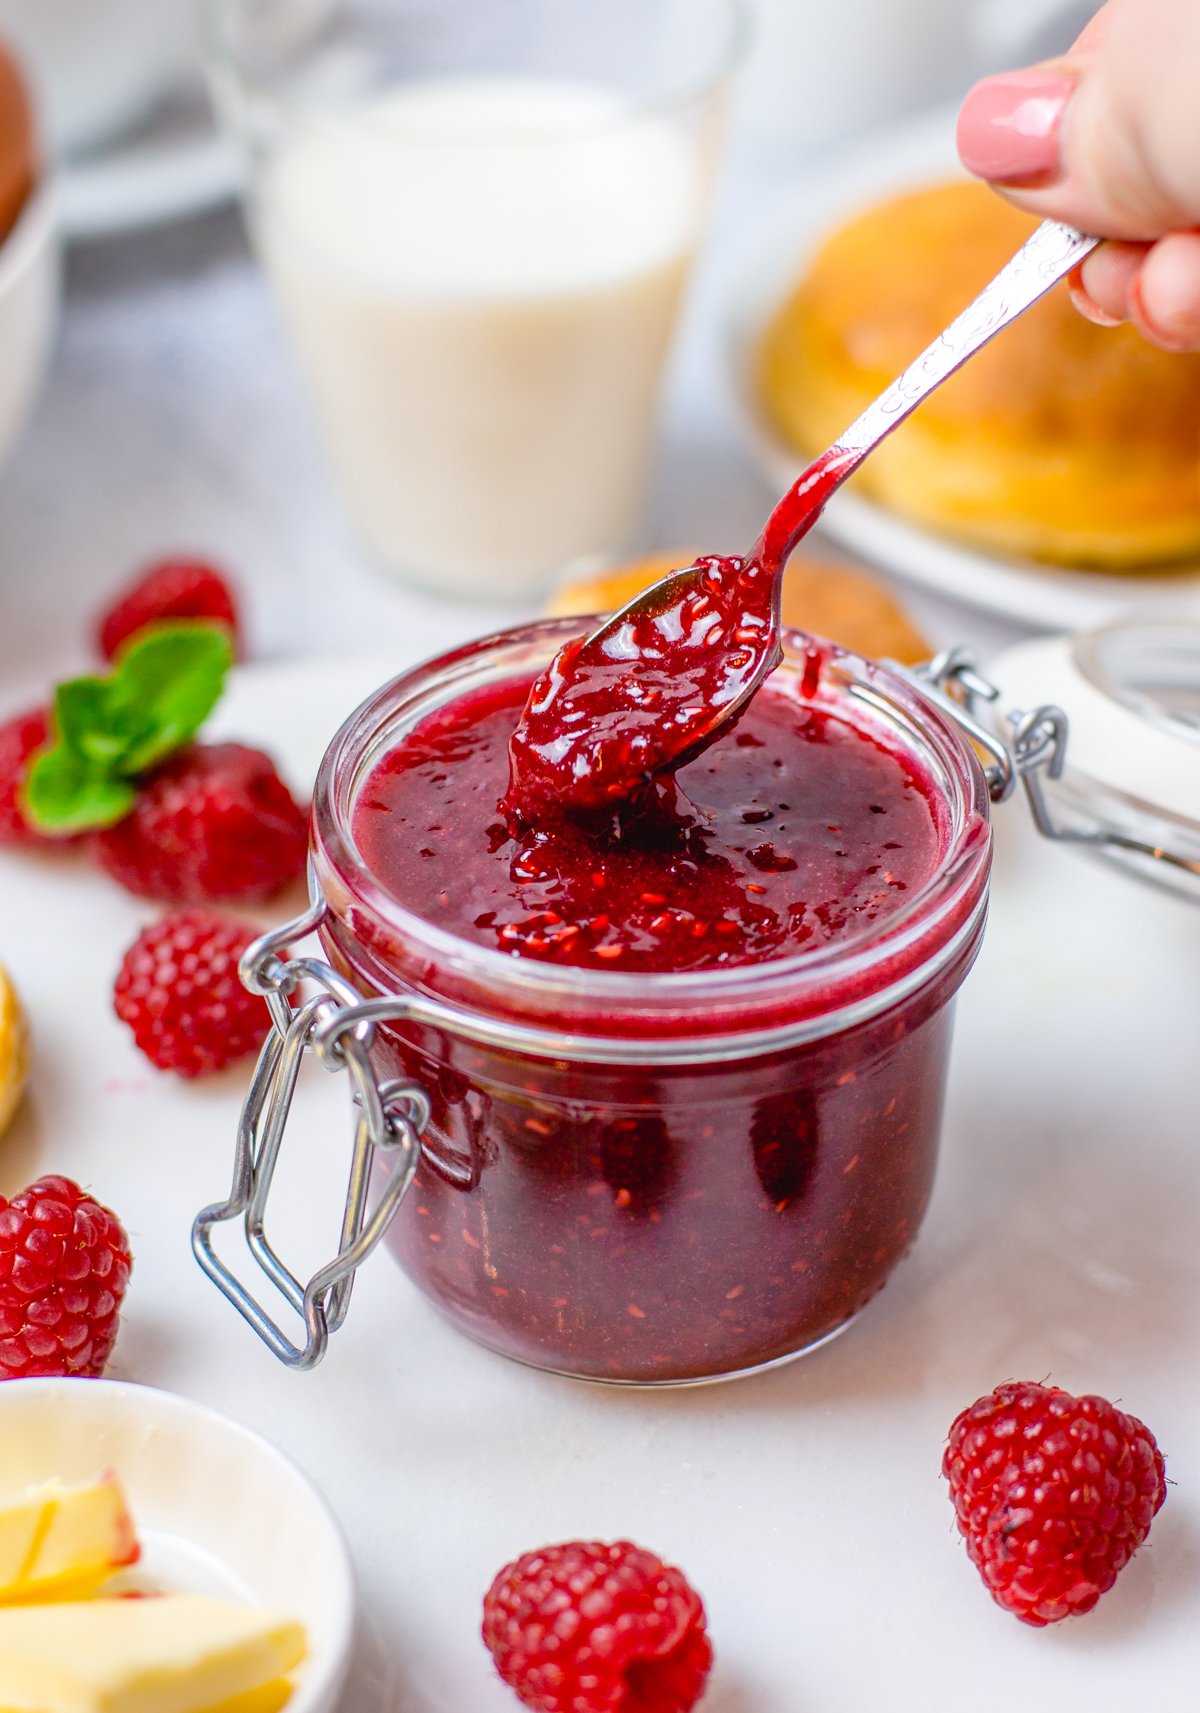 Spoon holding up some Raspberry Curd